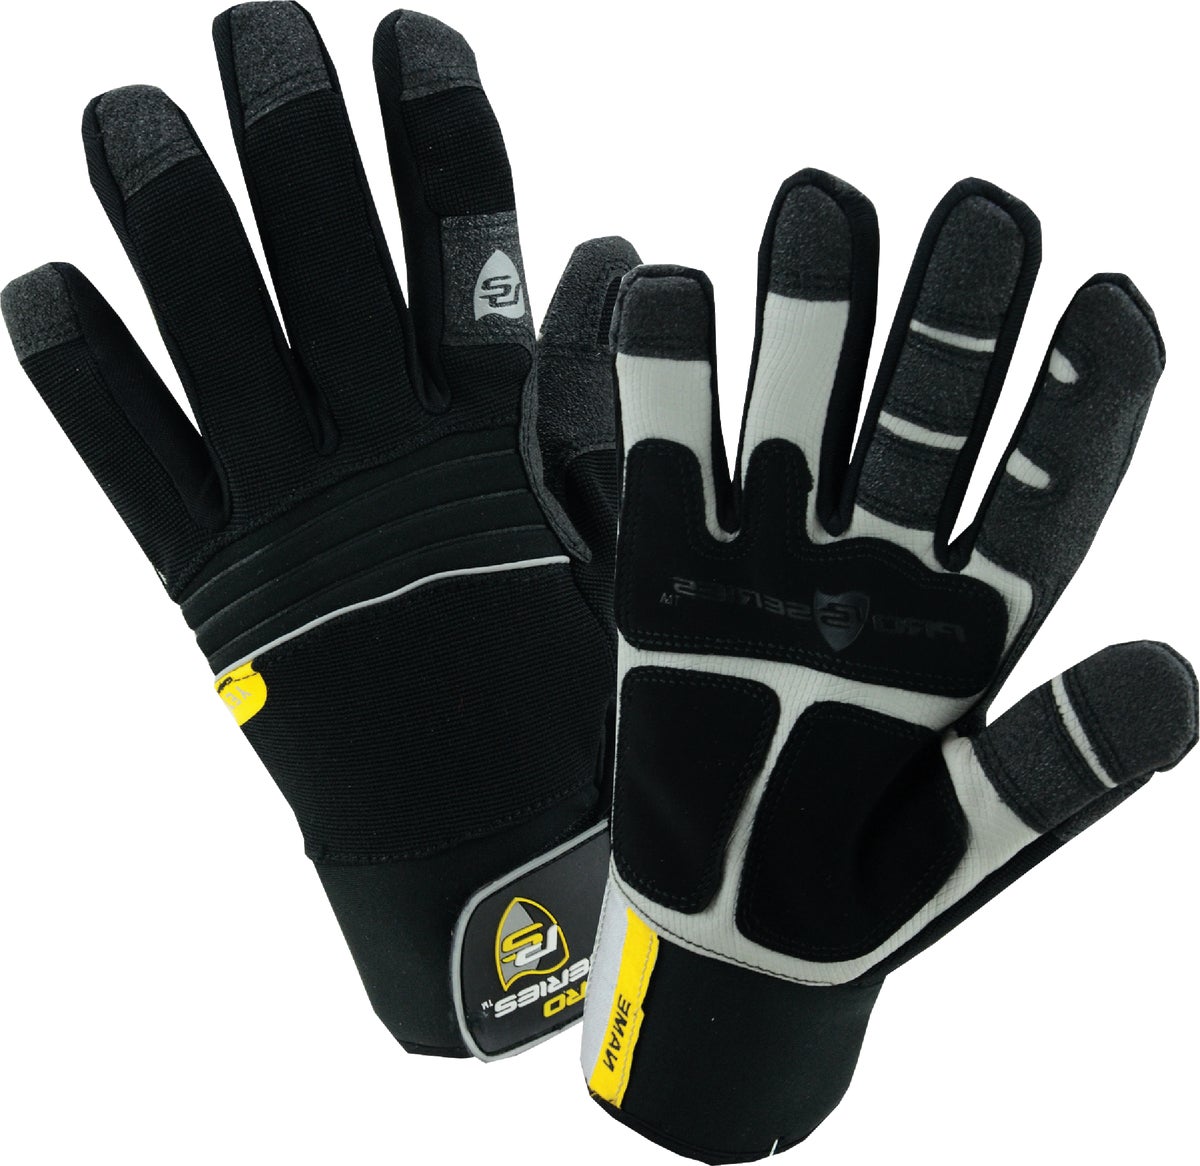 Buy West Chester Protective Gear Winter Work Glove XL, Black